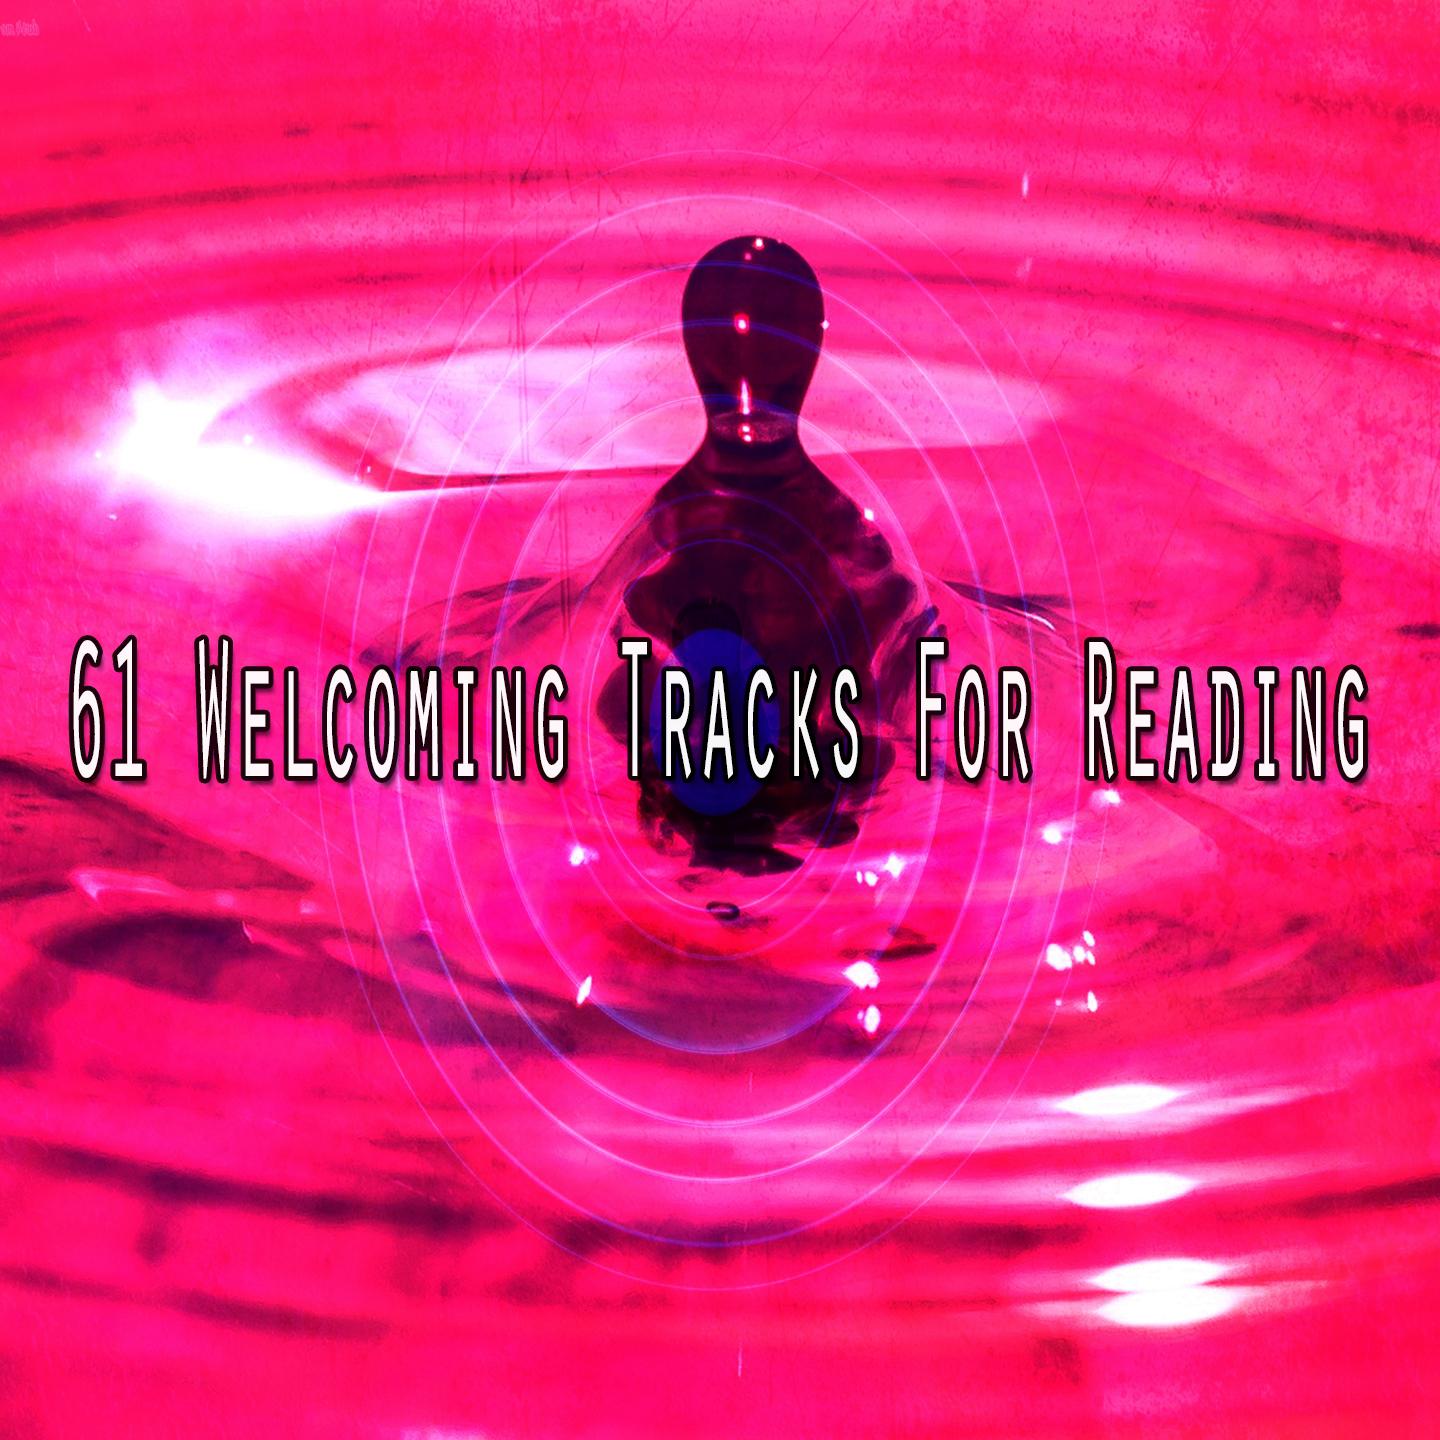 61 Welcoming Tracks for Reading